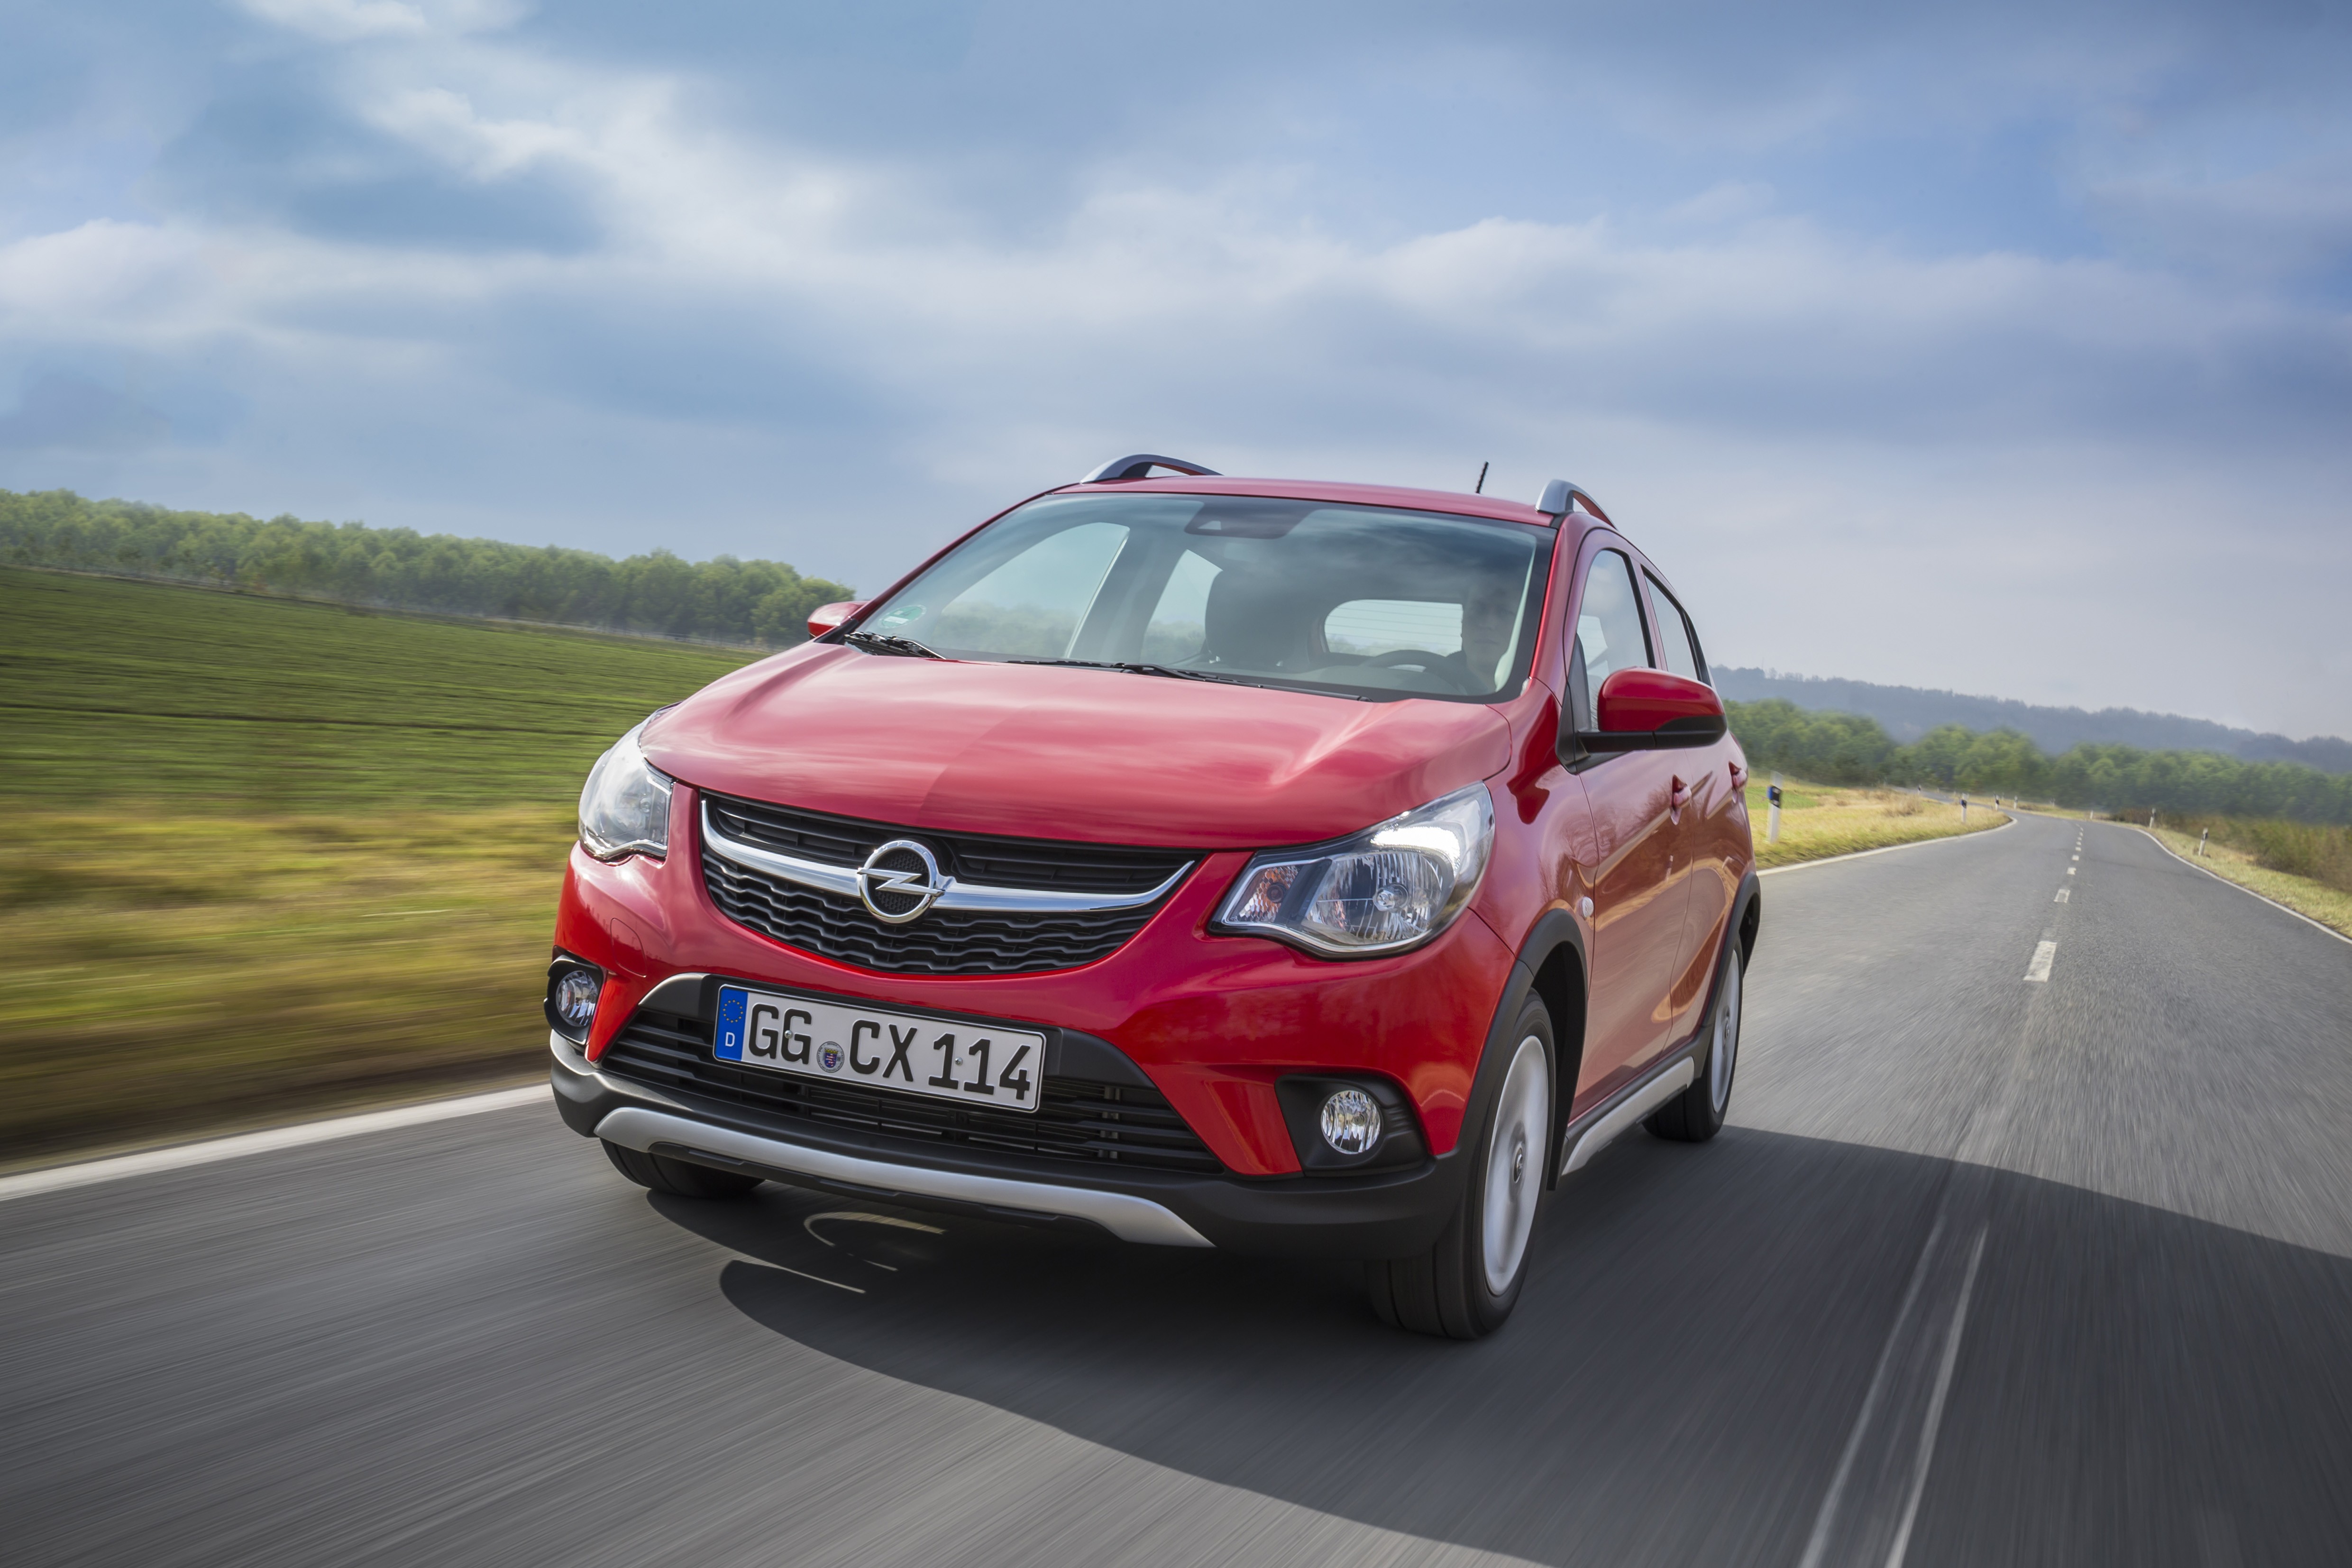 2017 Opel Karl Rocks Looks Like a Car Nobody Asked For - autoevolution4961 x 3308